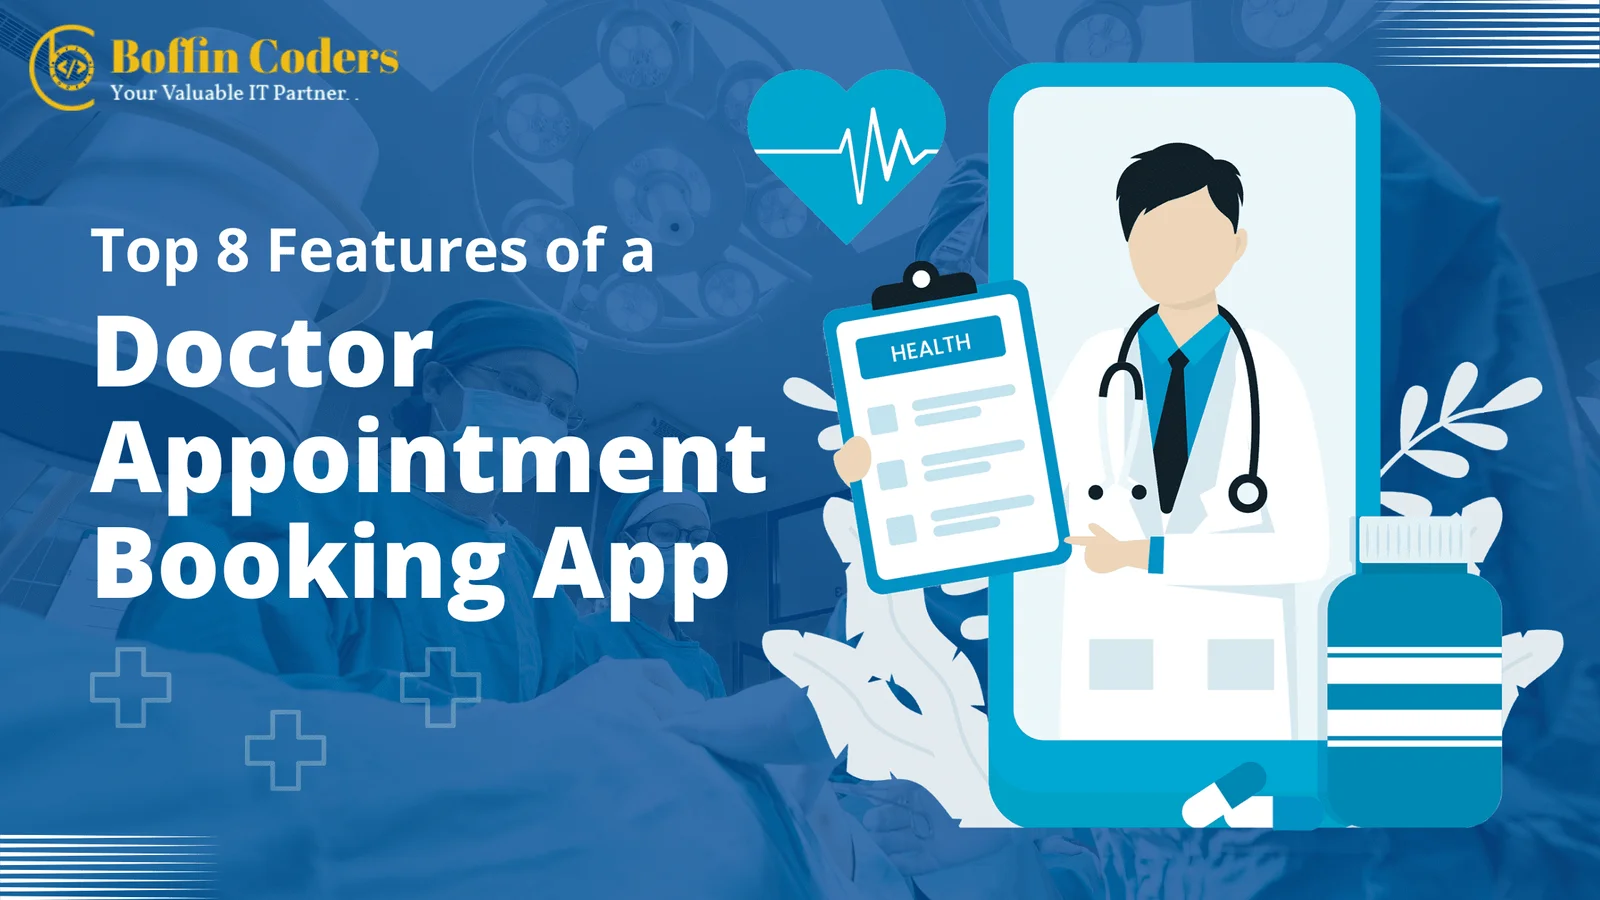 Top 8 Features of a Doctor Appointment Booking App